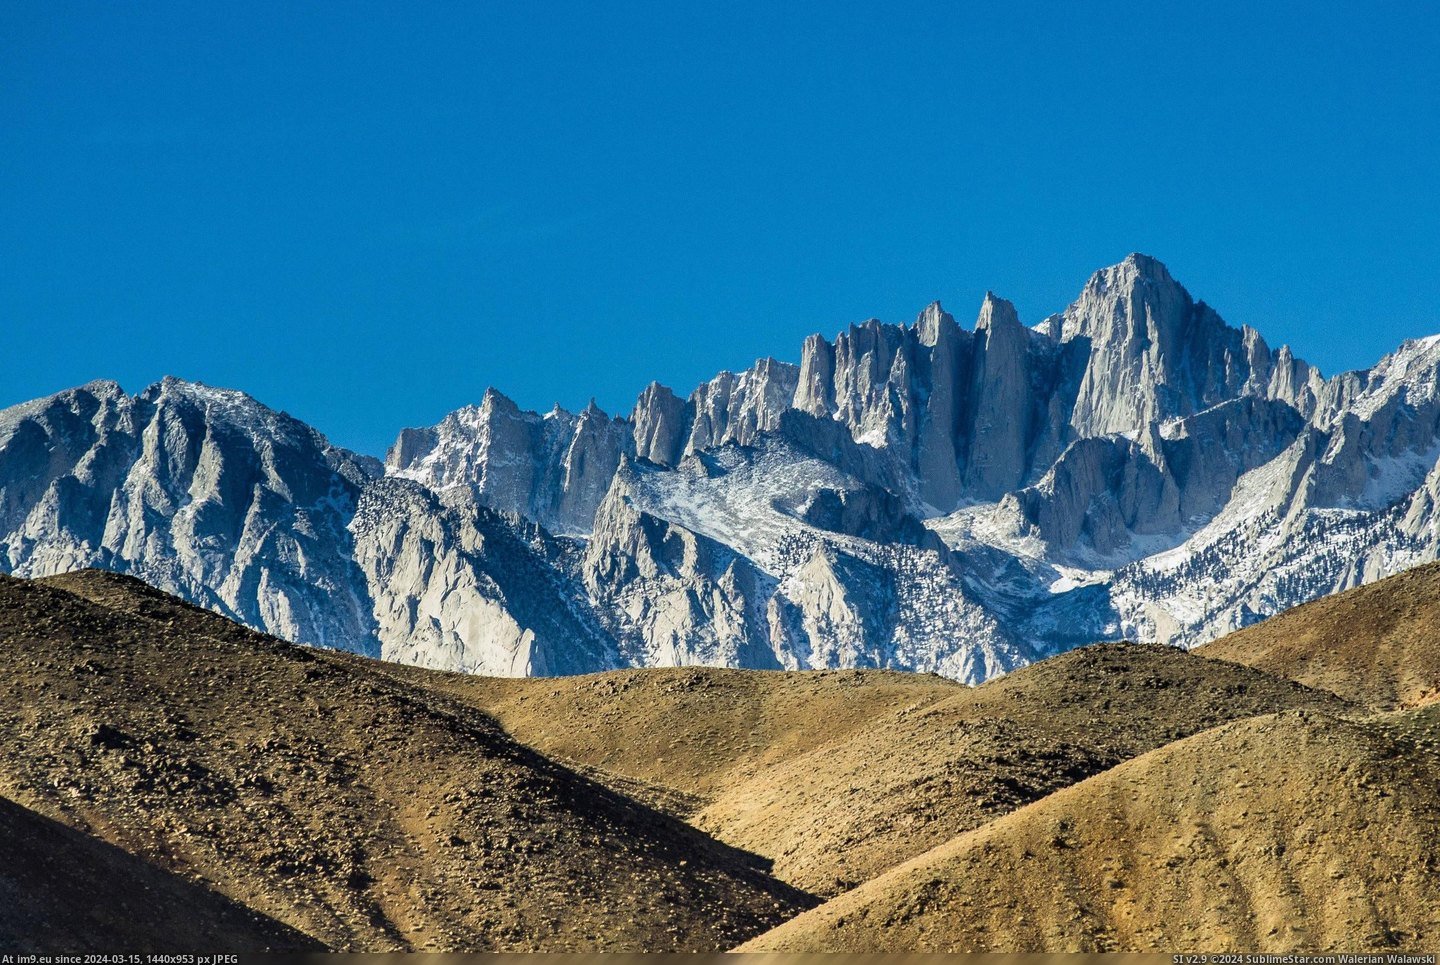 #States #Mount #Whitney #Elevation #Point #Highest [Earthporn] Mount Whitney, CA - Elevation 14,505, Prominence 10,079 - The highest point in the lower 48 states [2429x1619] Pic. (Image of album My r/EARTHPORN favs))